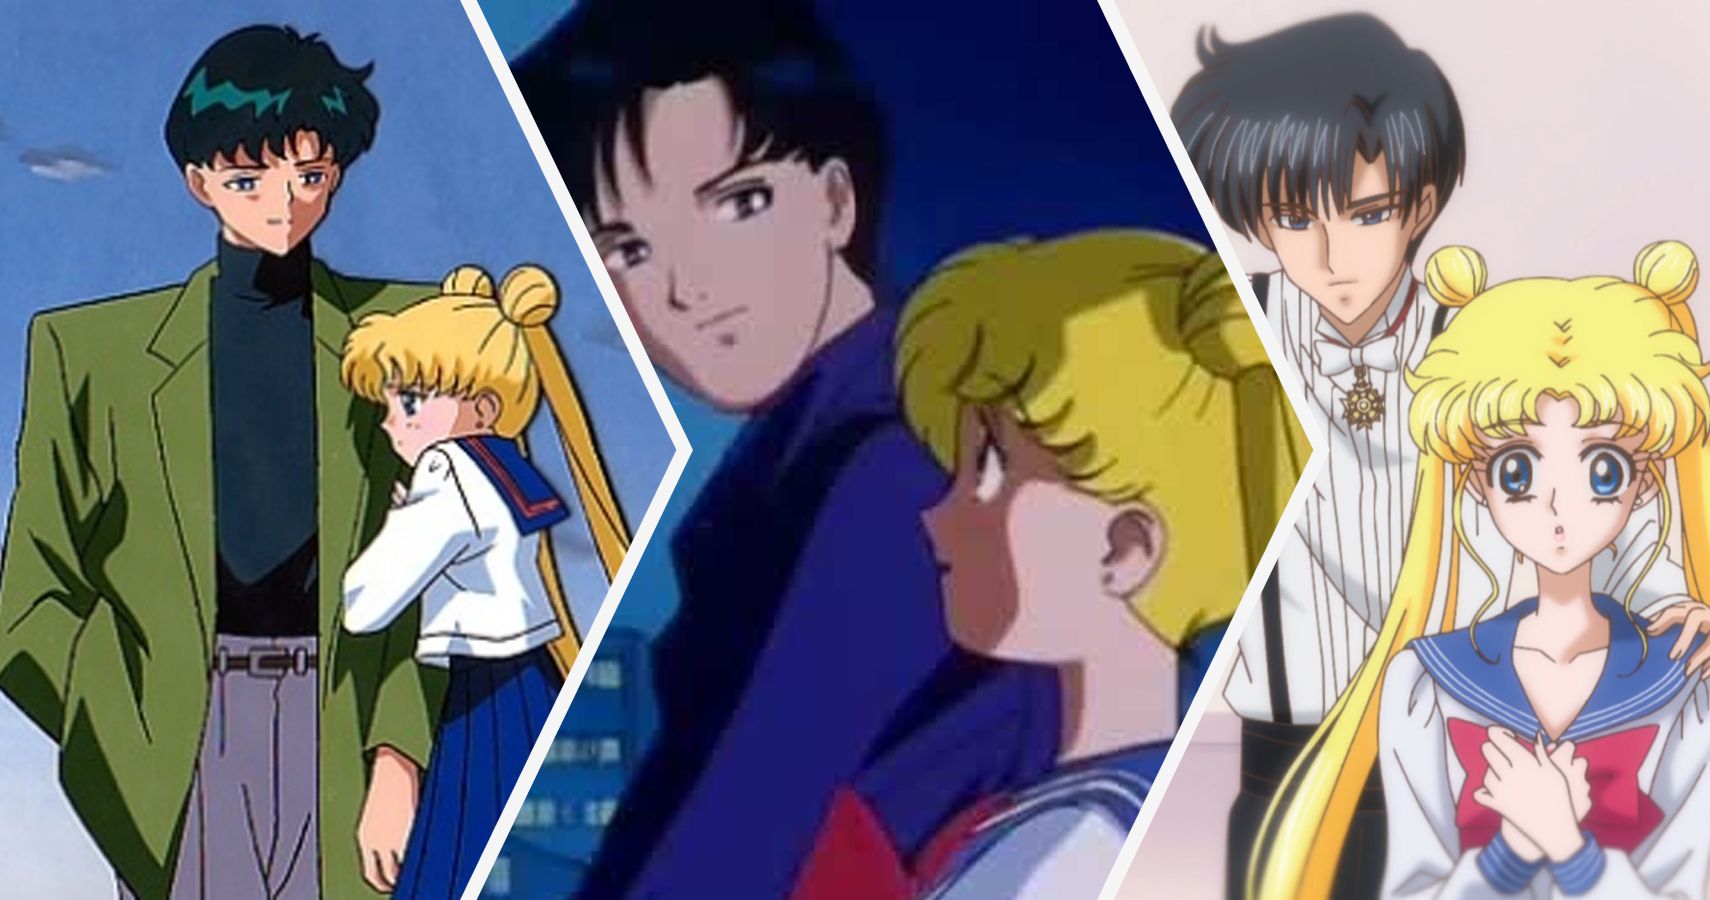 20 Strange Facts Only Real Fans Know About Sailor Moon And Tuxedo